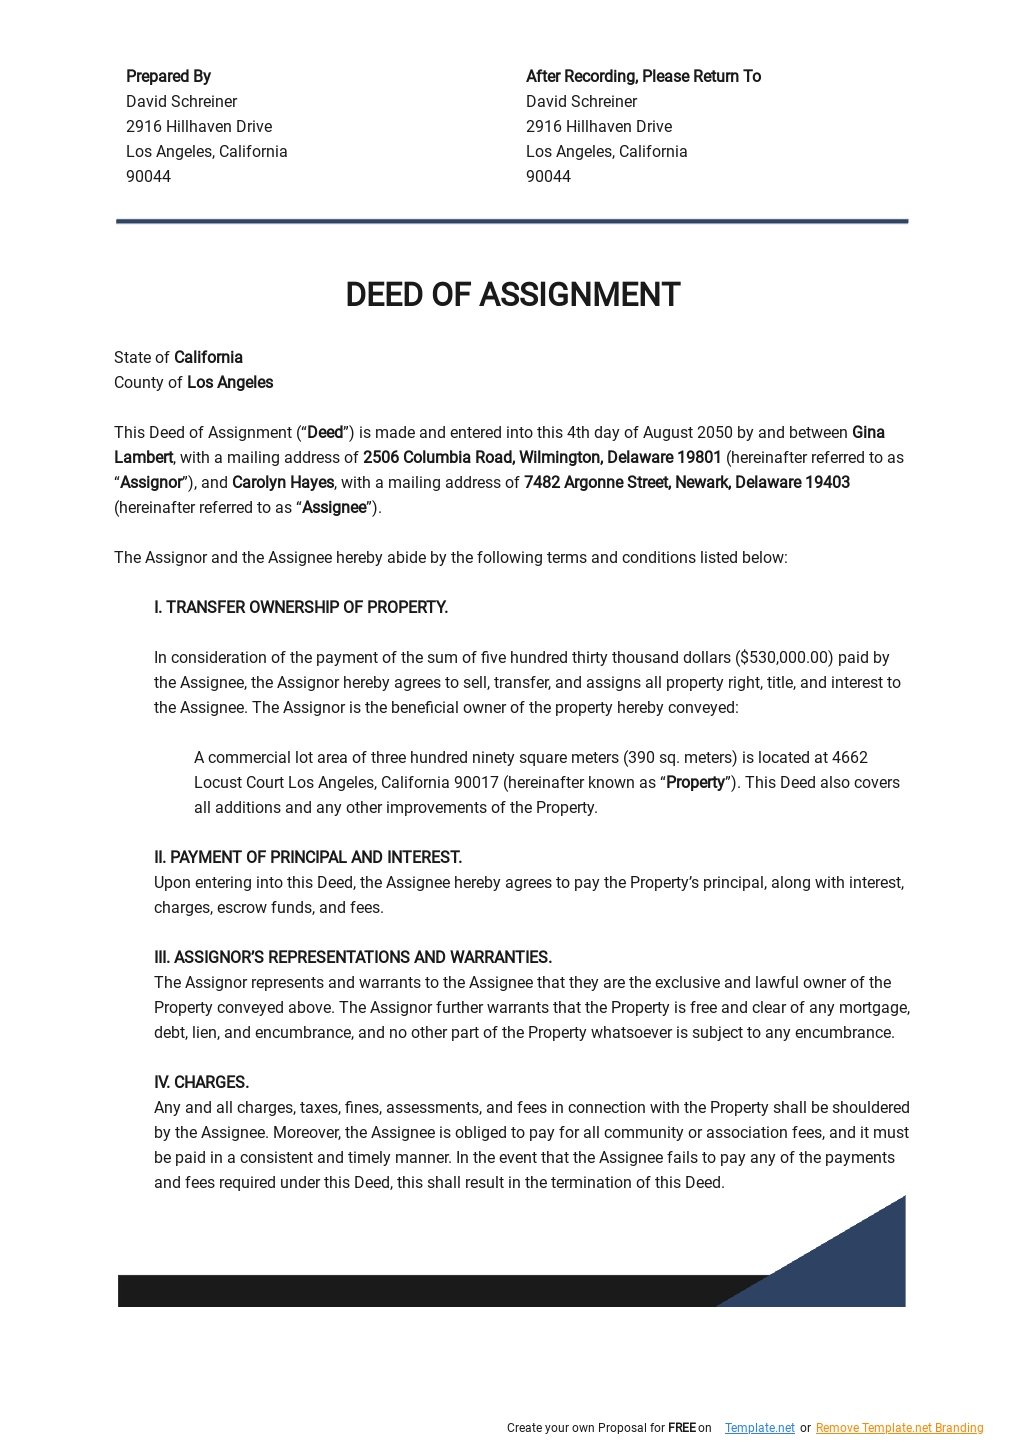 deed-of-assignment-template